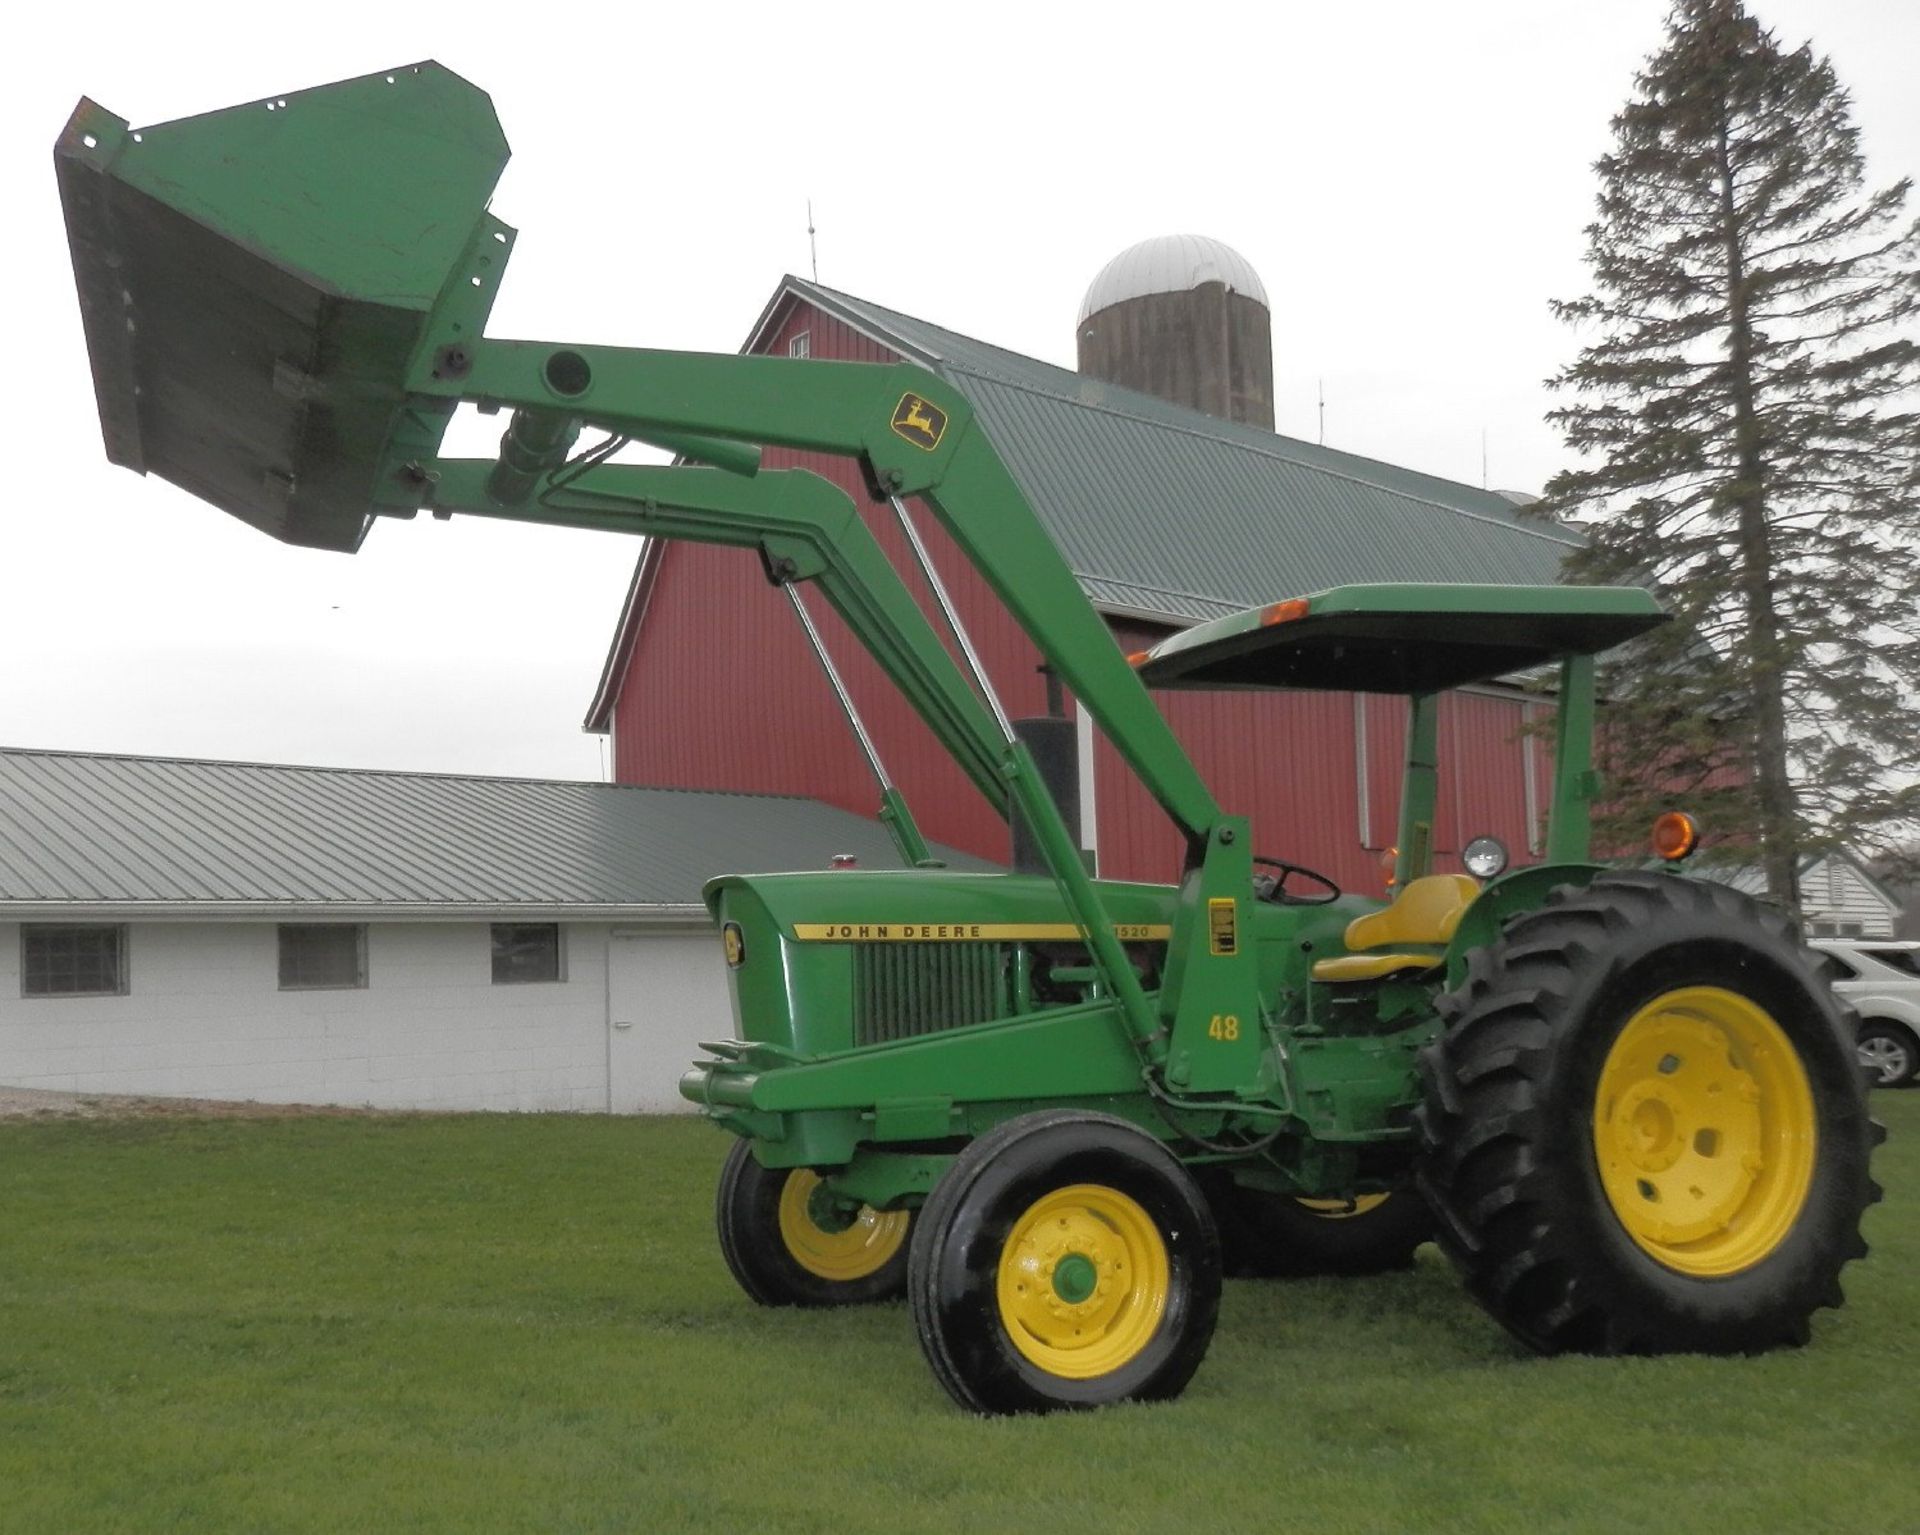 UTILITY TRACTOR, JOHN DEERE MDL. 1520, gasoline engine, Type E0048 front end loader attachment, ROPS